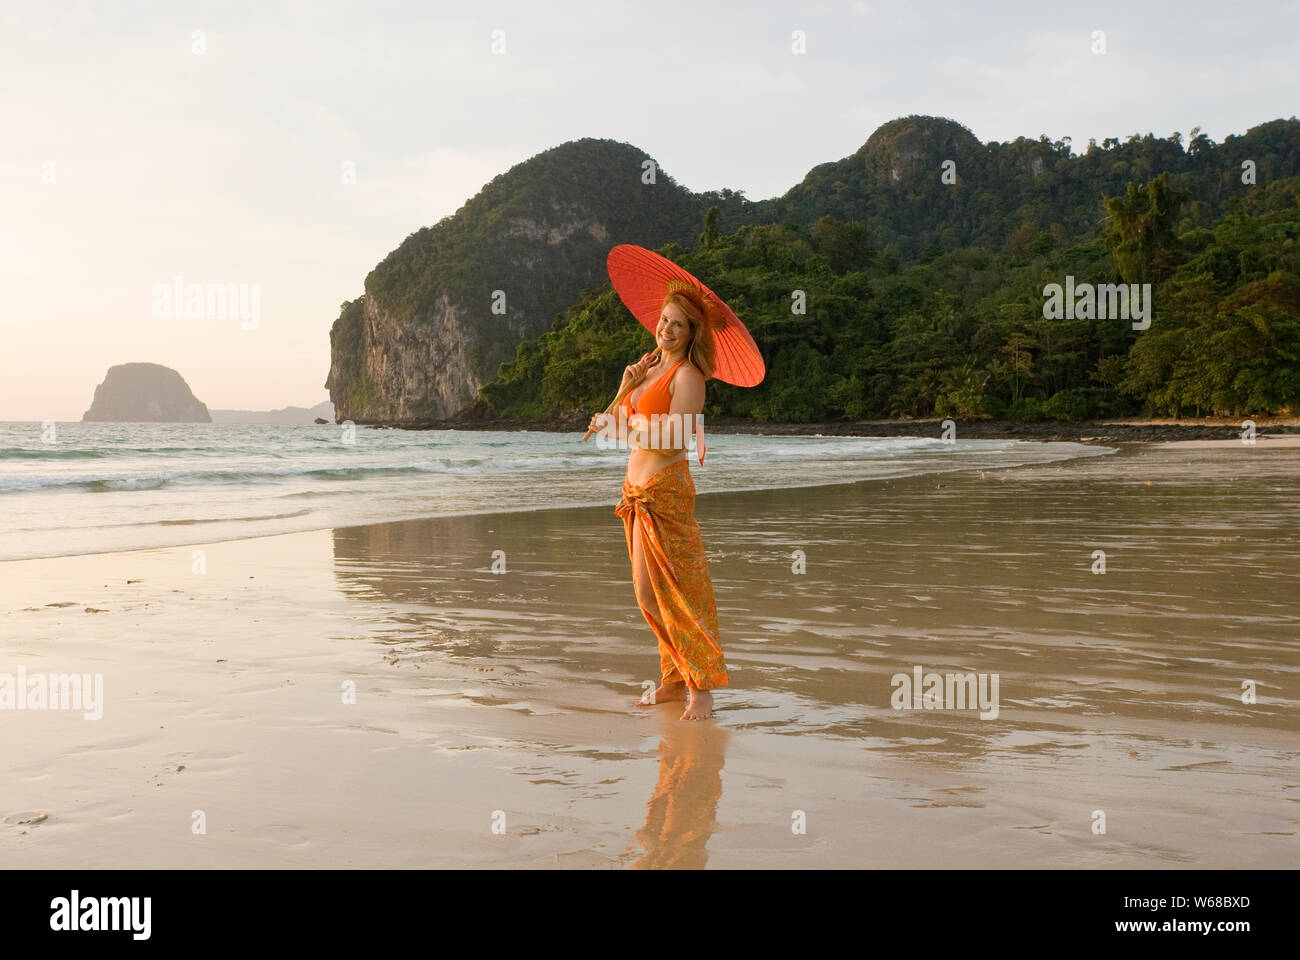 A Middle Age Female Tourist in a Sarong with an Traditional Thi Umbrella Standing on a Beach in Phi Phi Islands in Thailand and Model is Released. Stock Photo